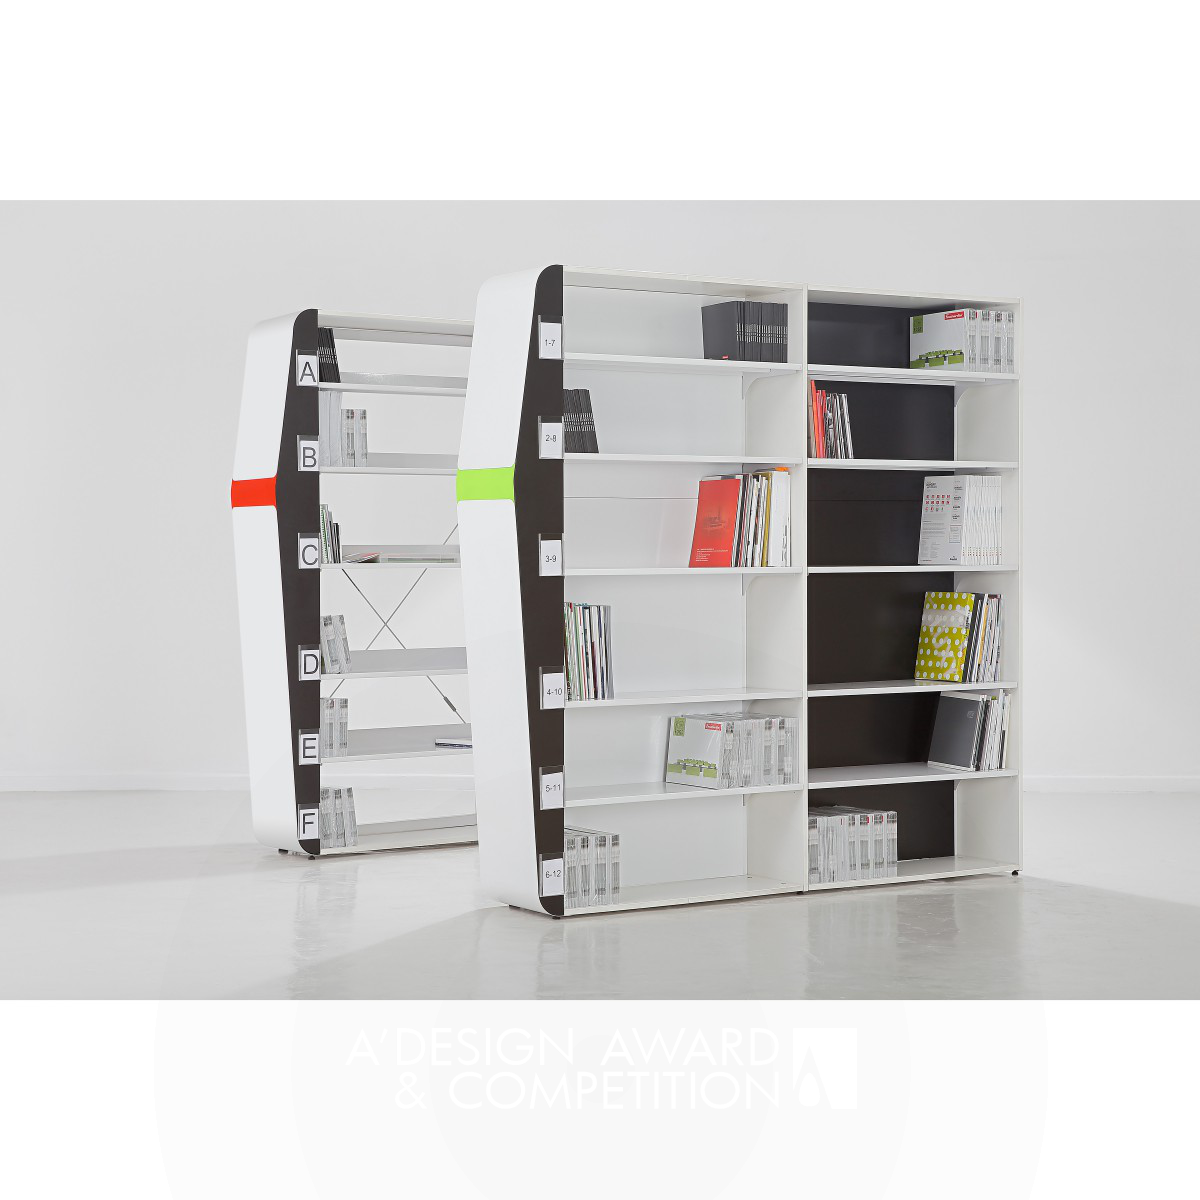 Guide Library System, Book Rack by Suman Swarup Prusty